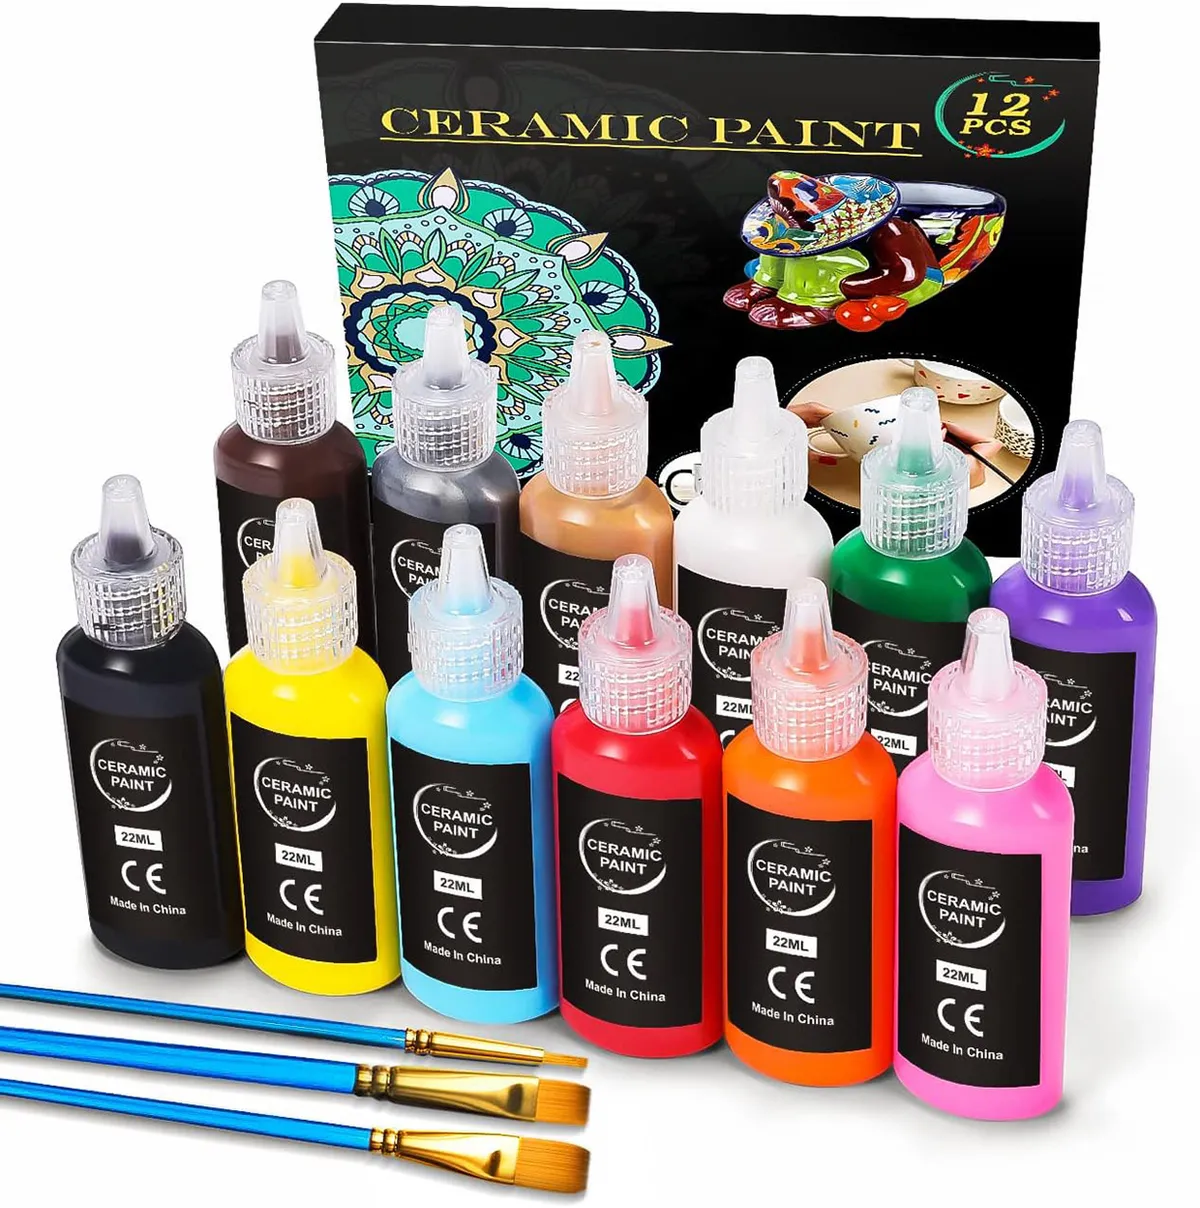 Shuttle Art Shuttle Art acrylic paints acrylic pigment 36 colors set  metallic color quick-drying waterproof durability 60ml palette brush with  cloth / glass / children's illustration Coloring craft handmade art  painting materials